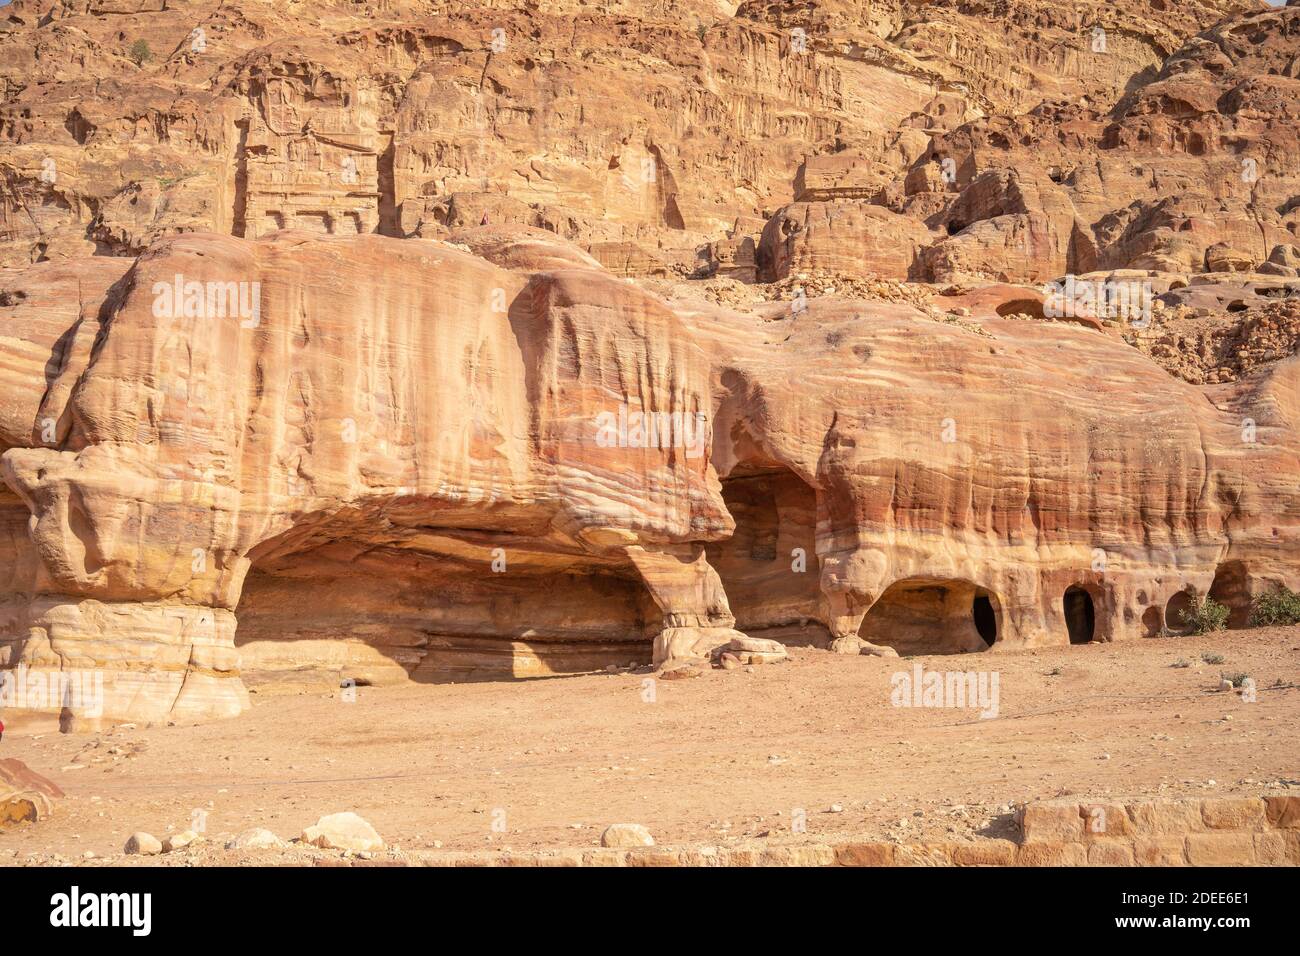 View of Burial caves in ancient Petra city in Jordan. Caves are carved out of sandstone right into the rock. Theme of travel in Jordan. Stock Photo